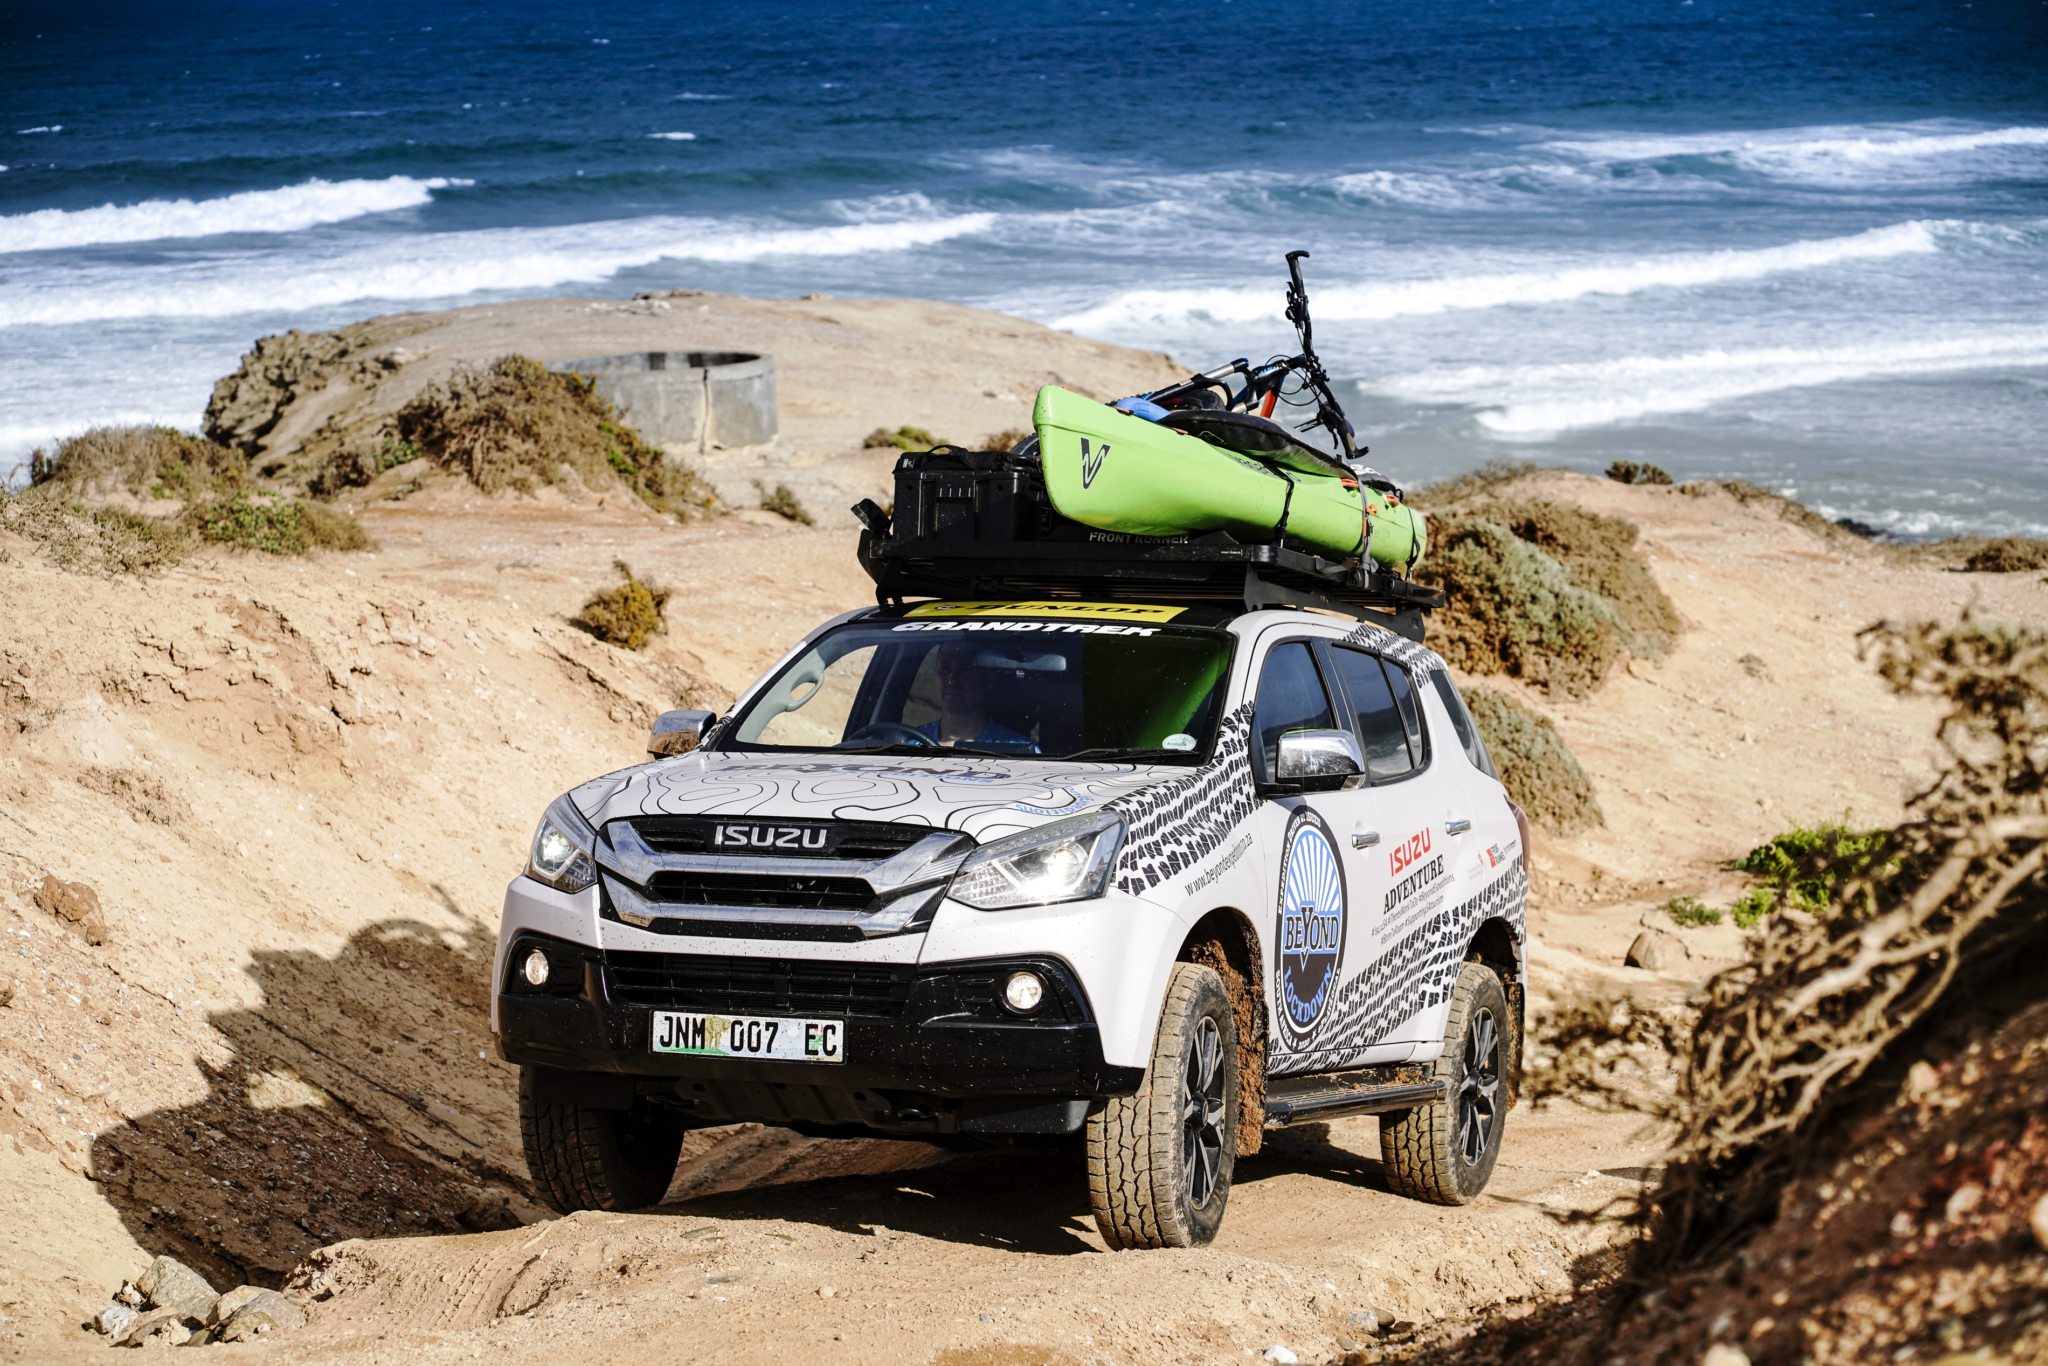 Sumitomo South Africa helps Google Street View in mapping adventure